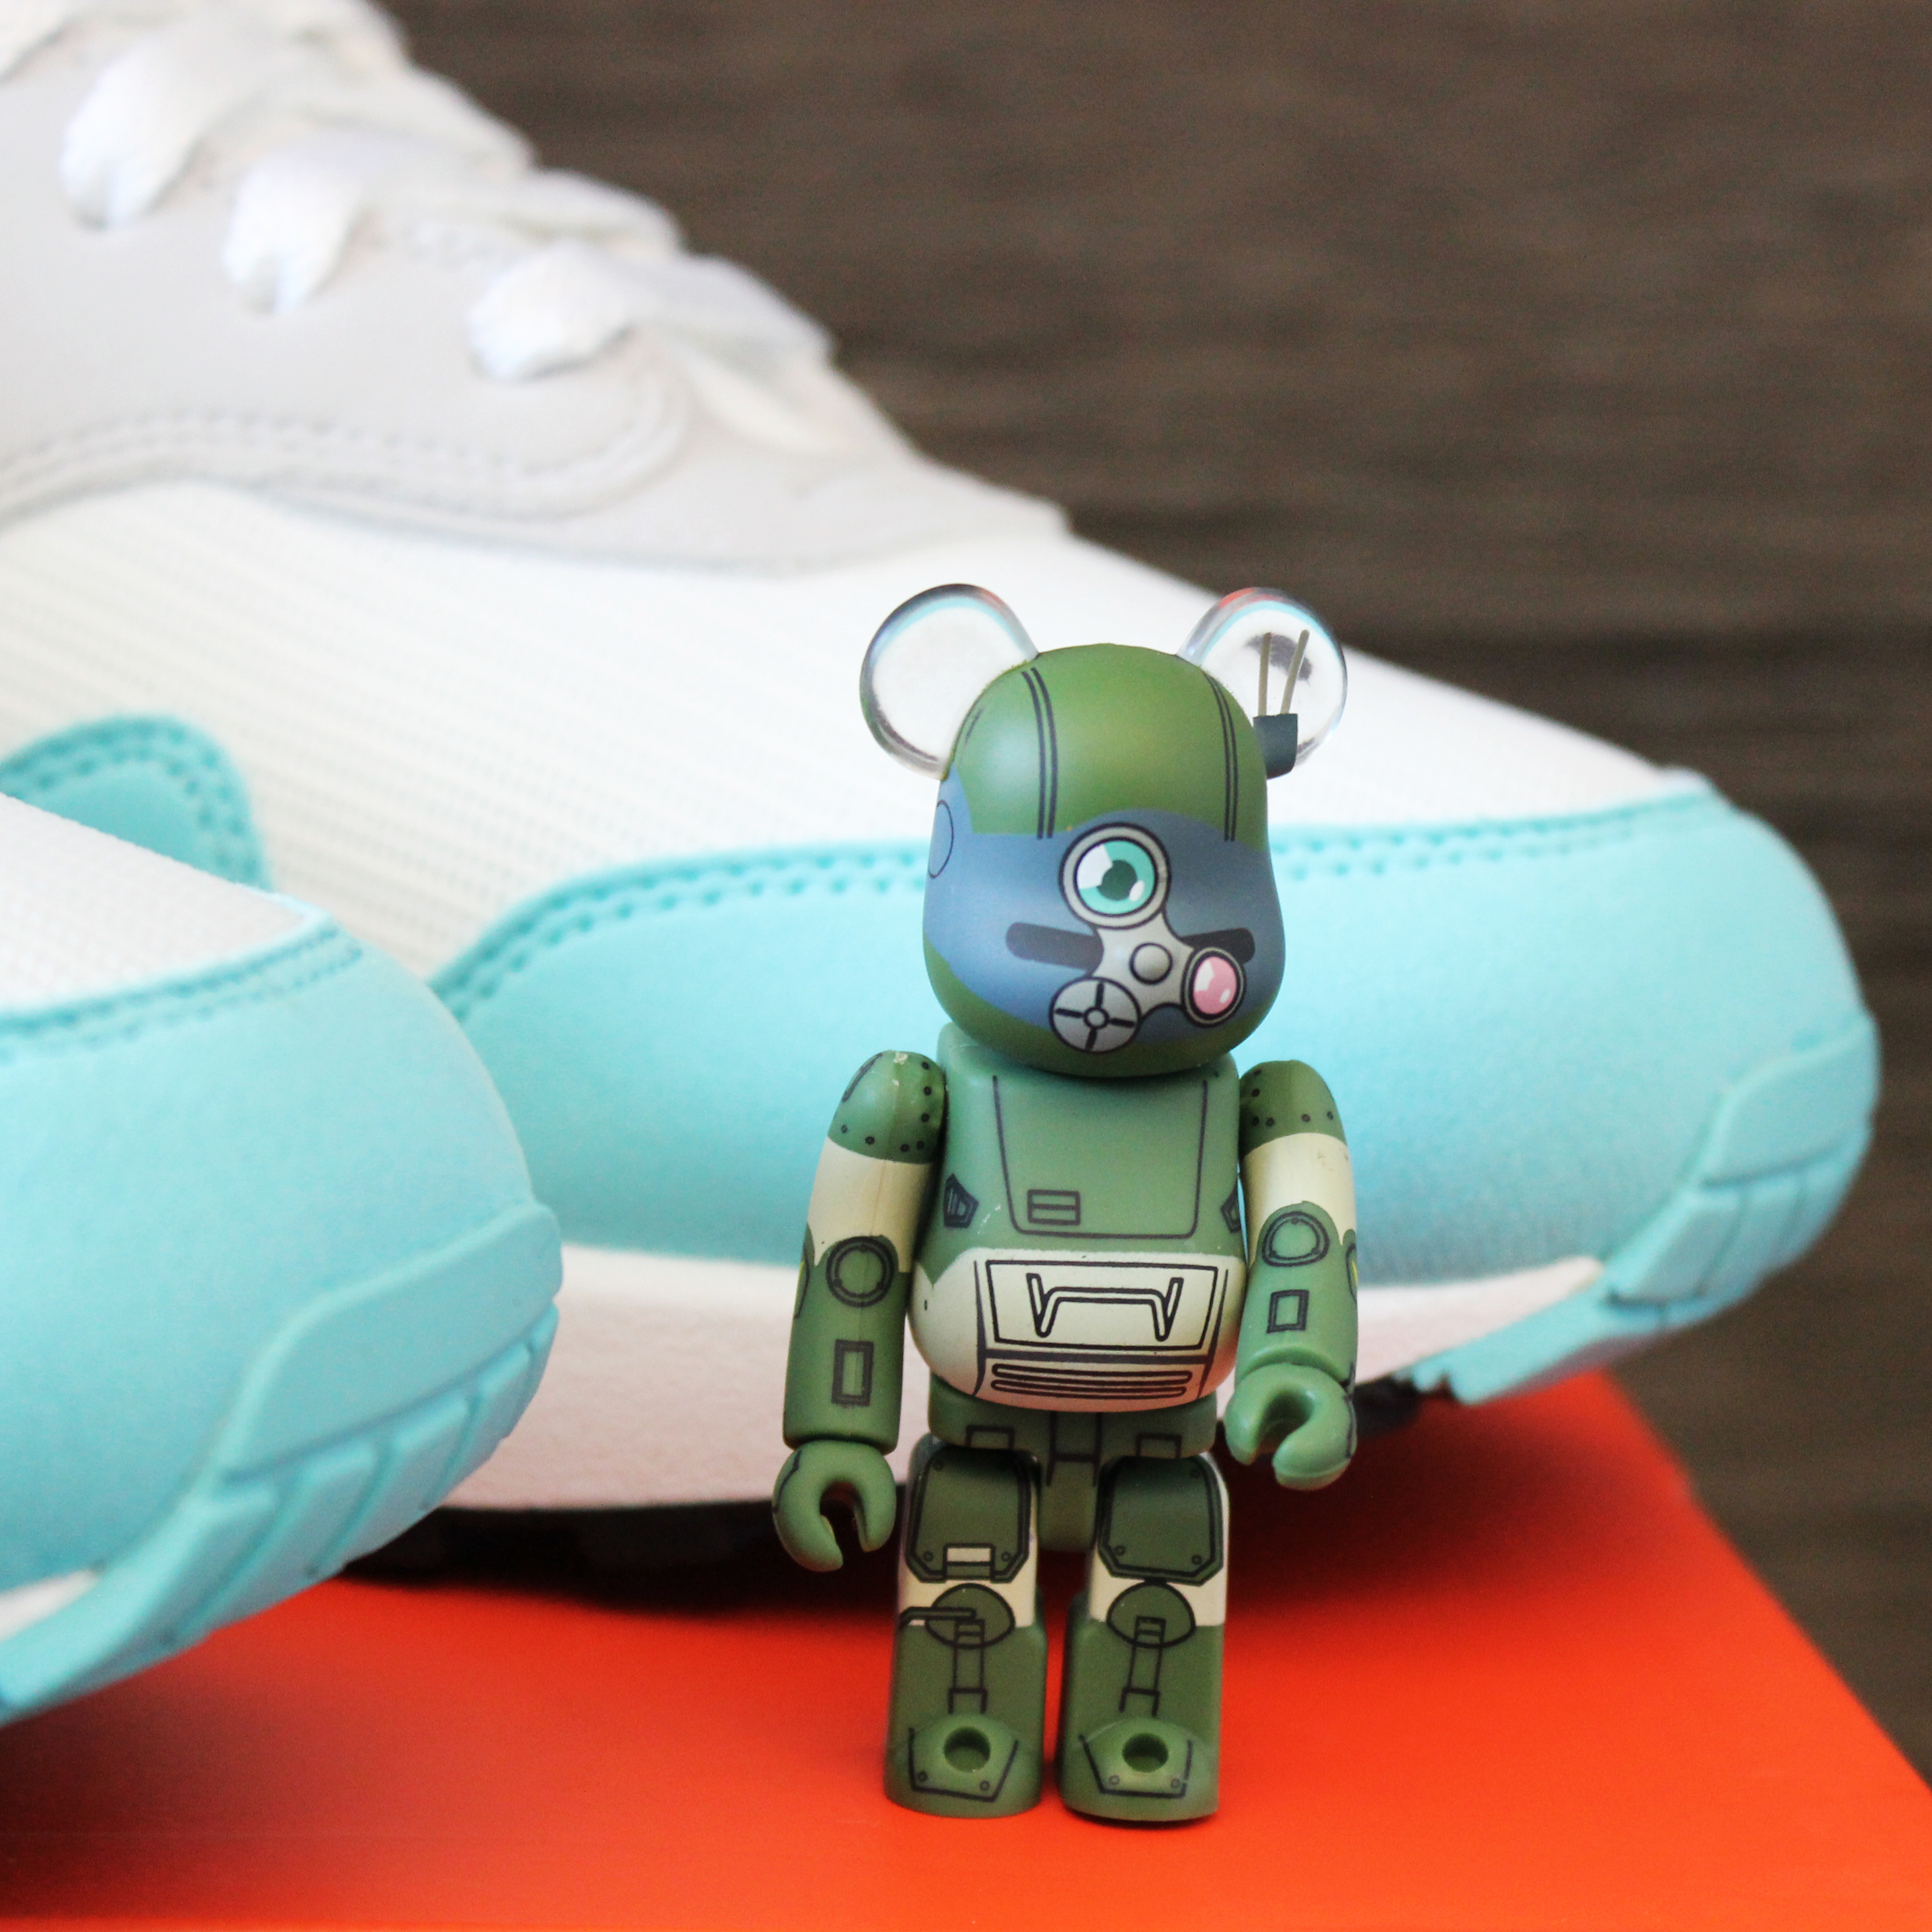 AM1 with Bearbrick